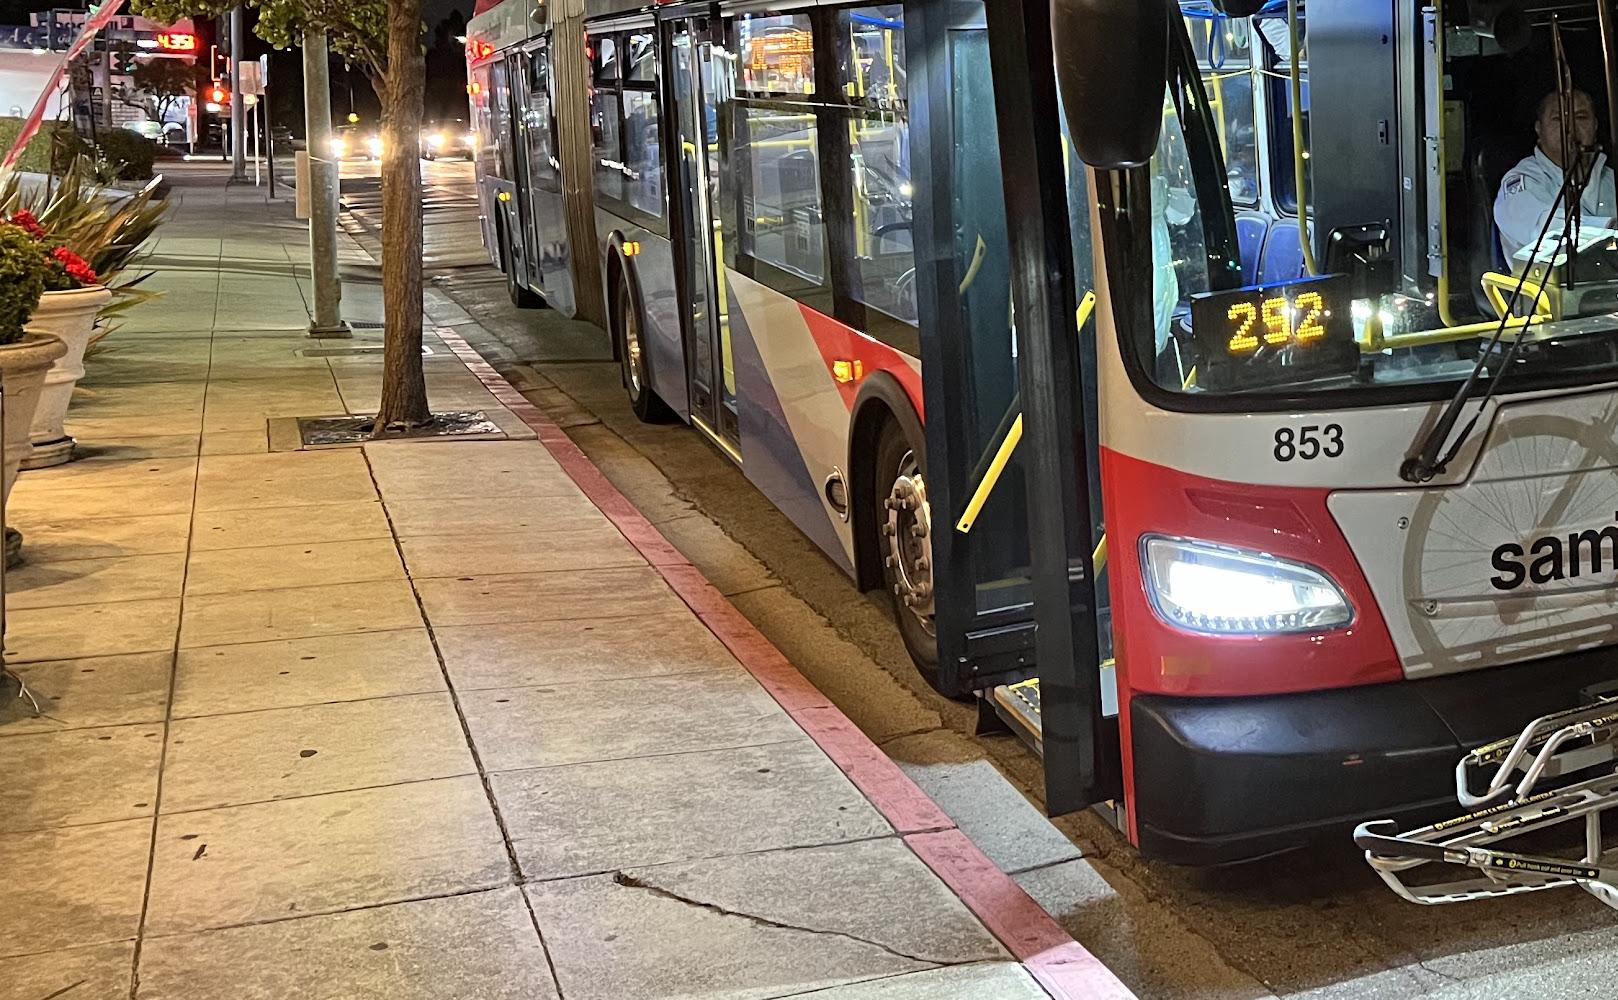 Route 292 at a bus stop on California Drive in Burlingame at night.